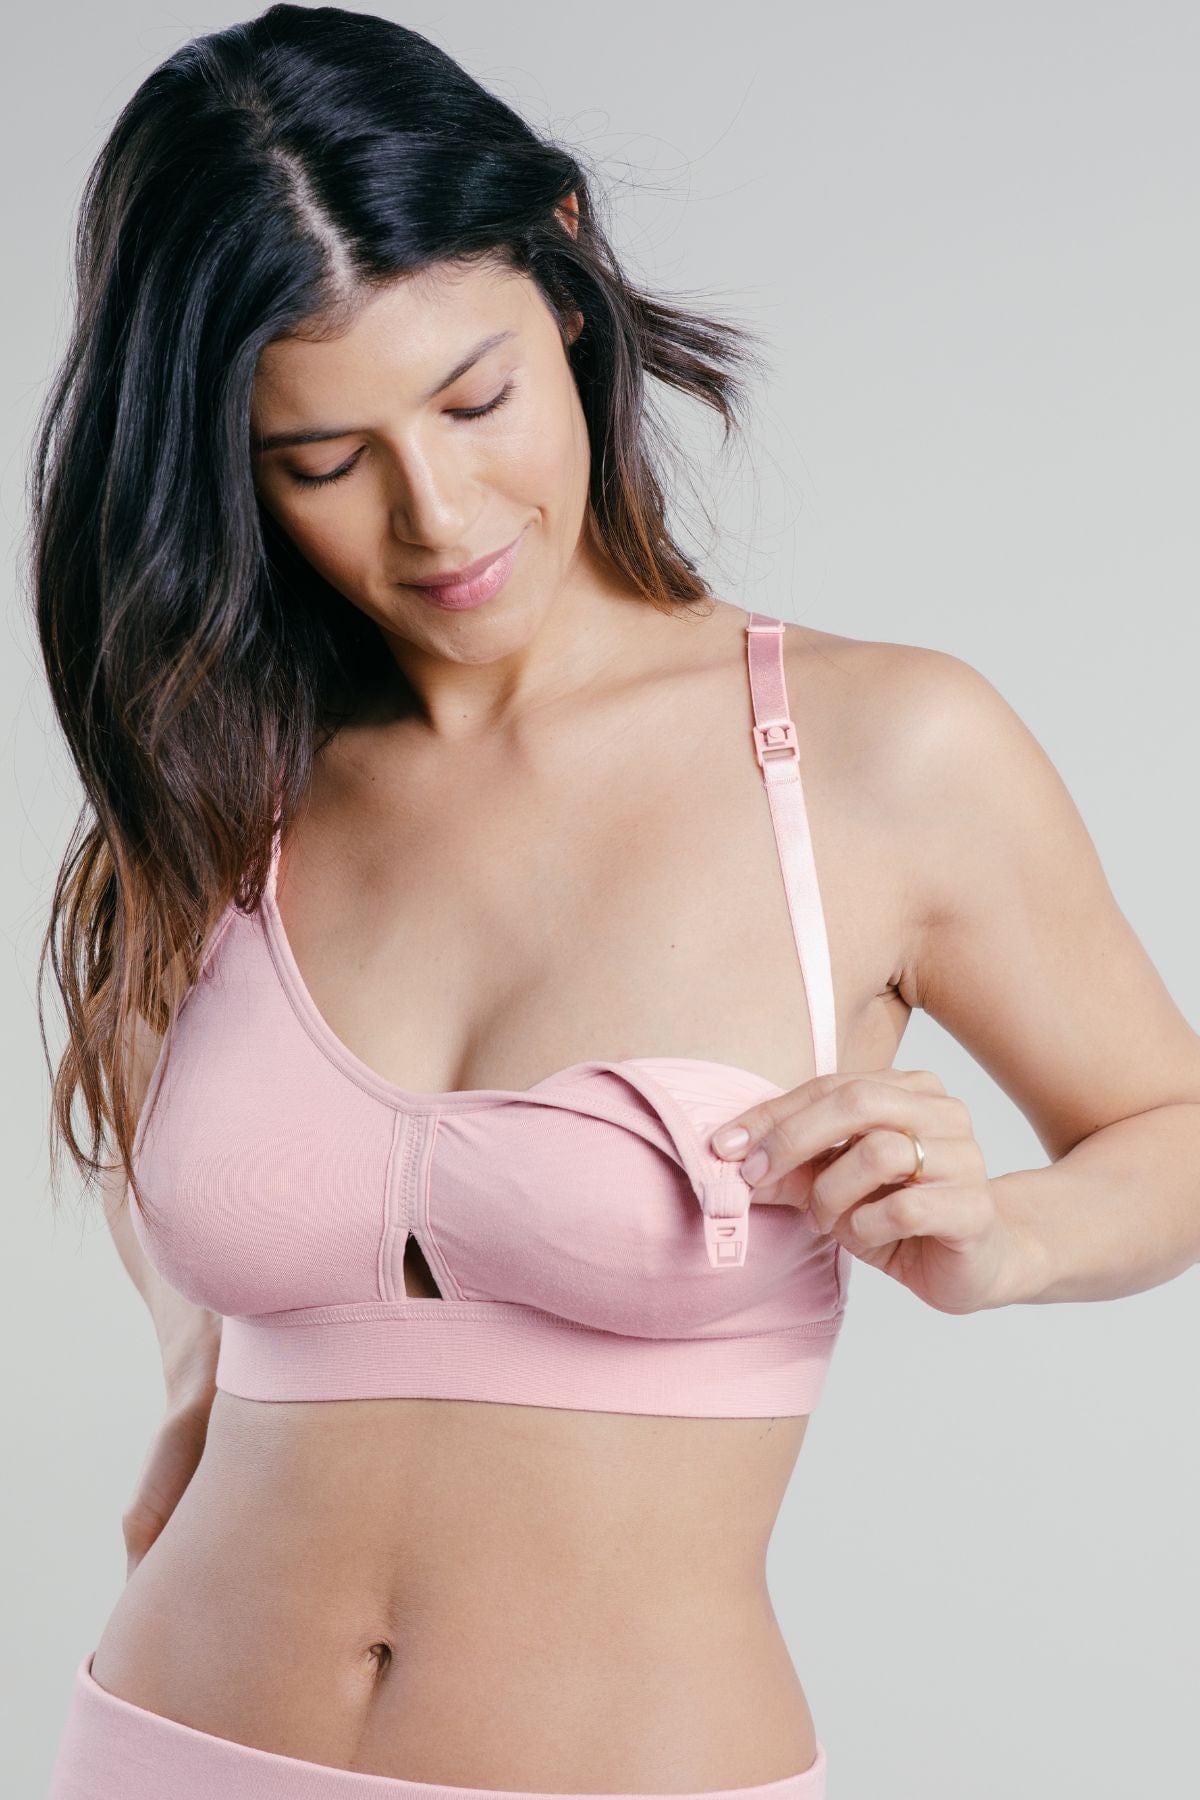 Save Time: Subscribe Today & Get a FREE Bra - Eby